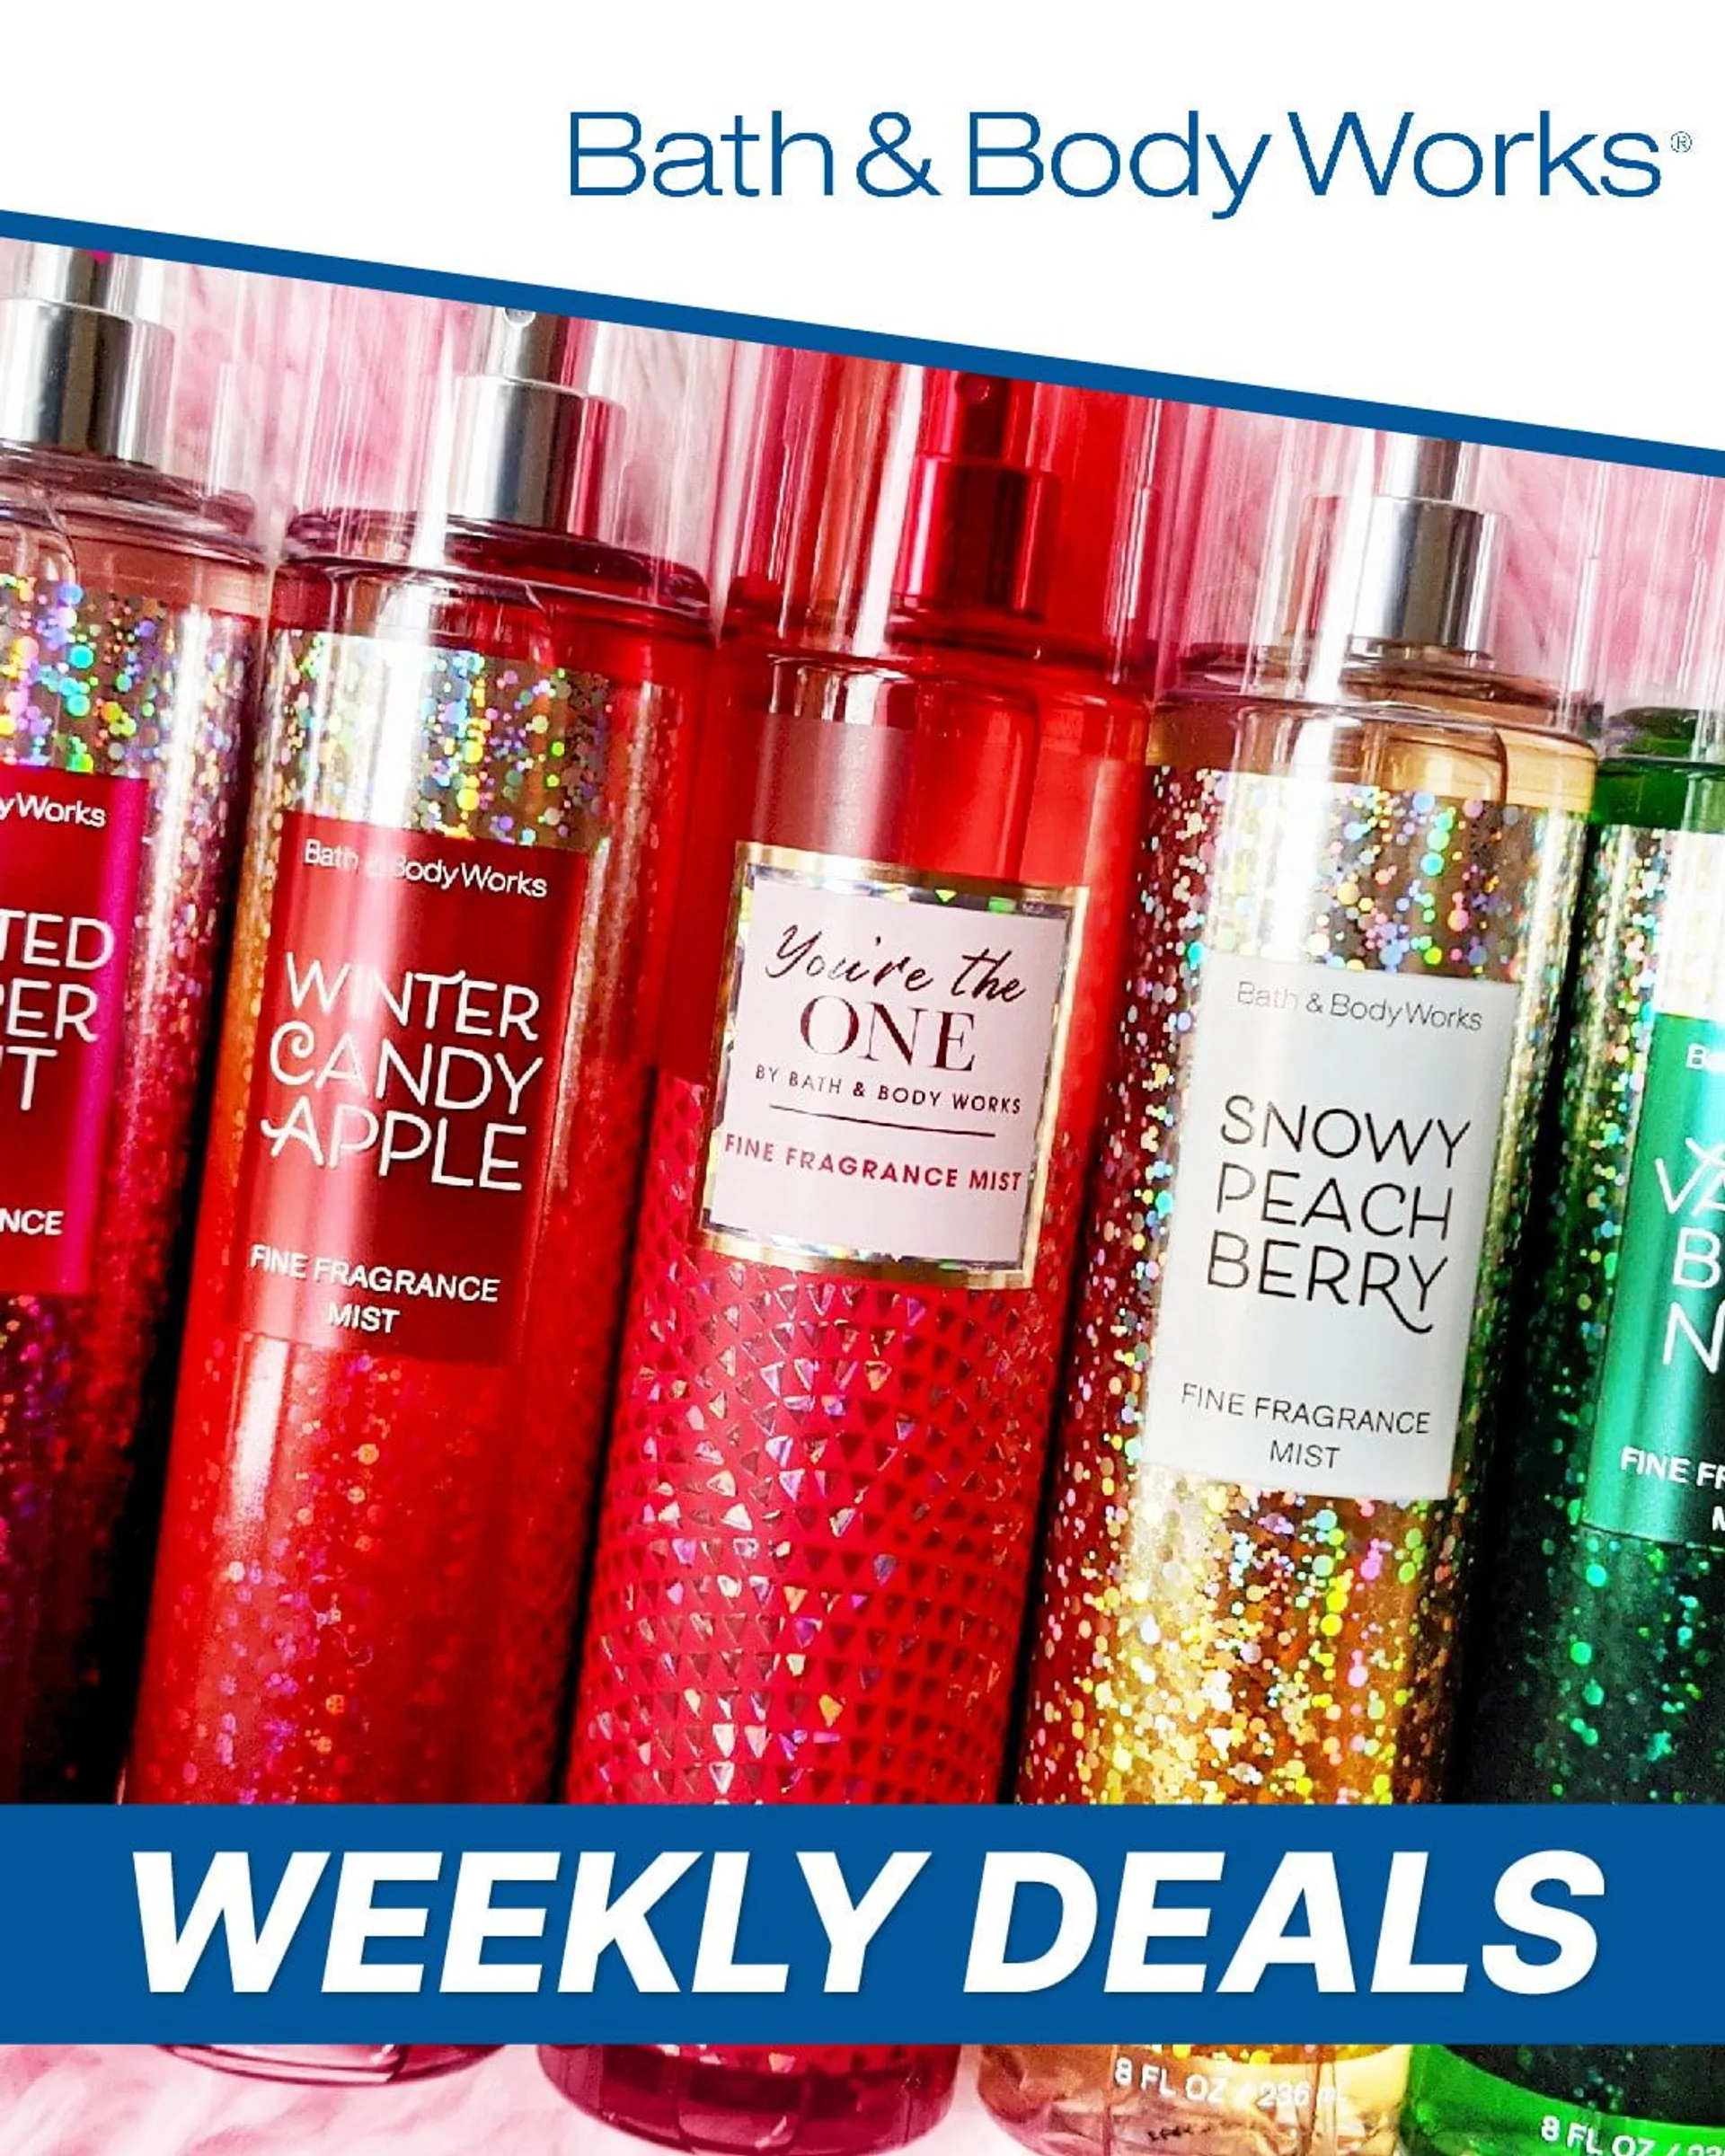 Weekly ad Bath & Body Works - Weekly deals from January 9 to January 14 2023 - Page 1